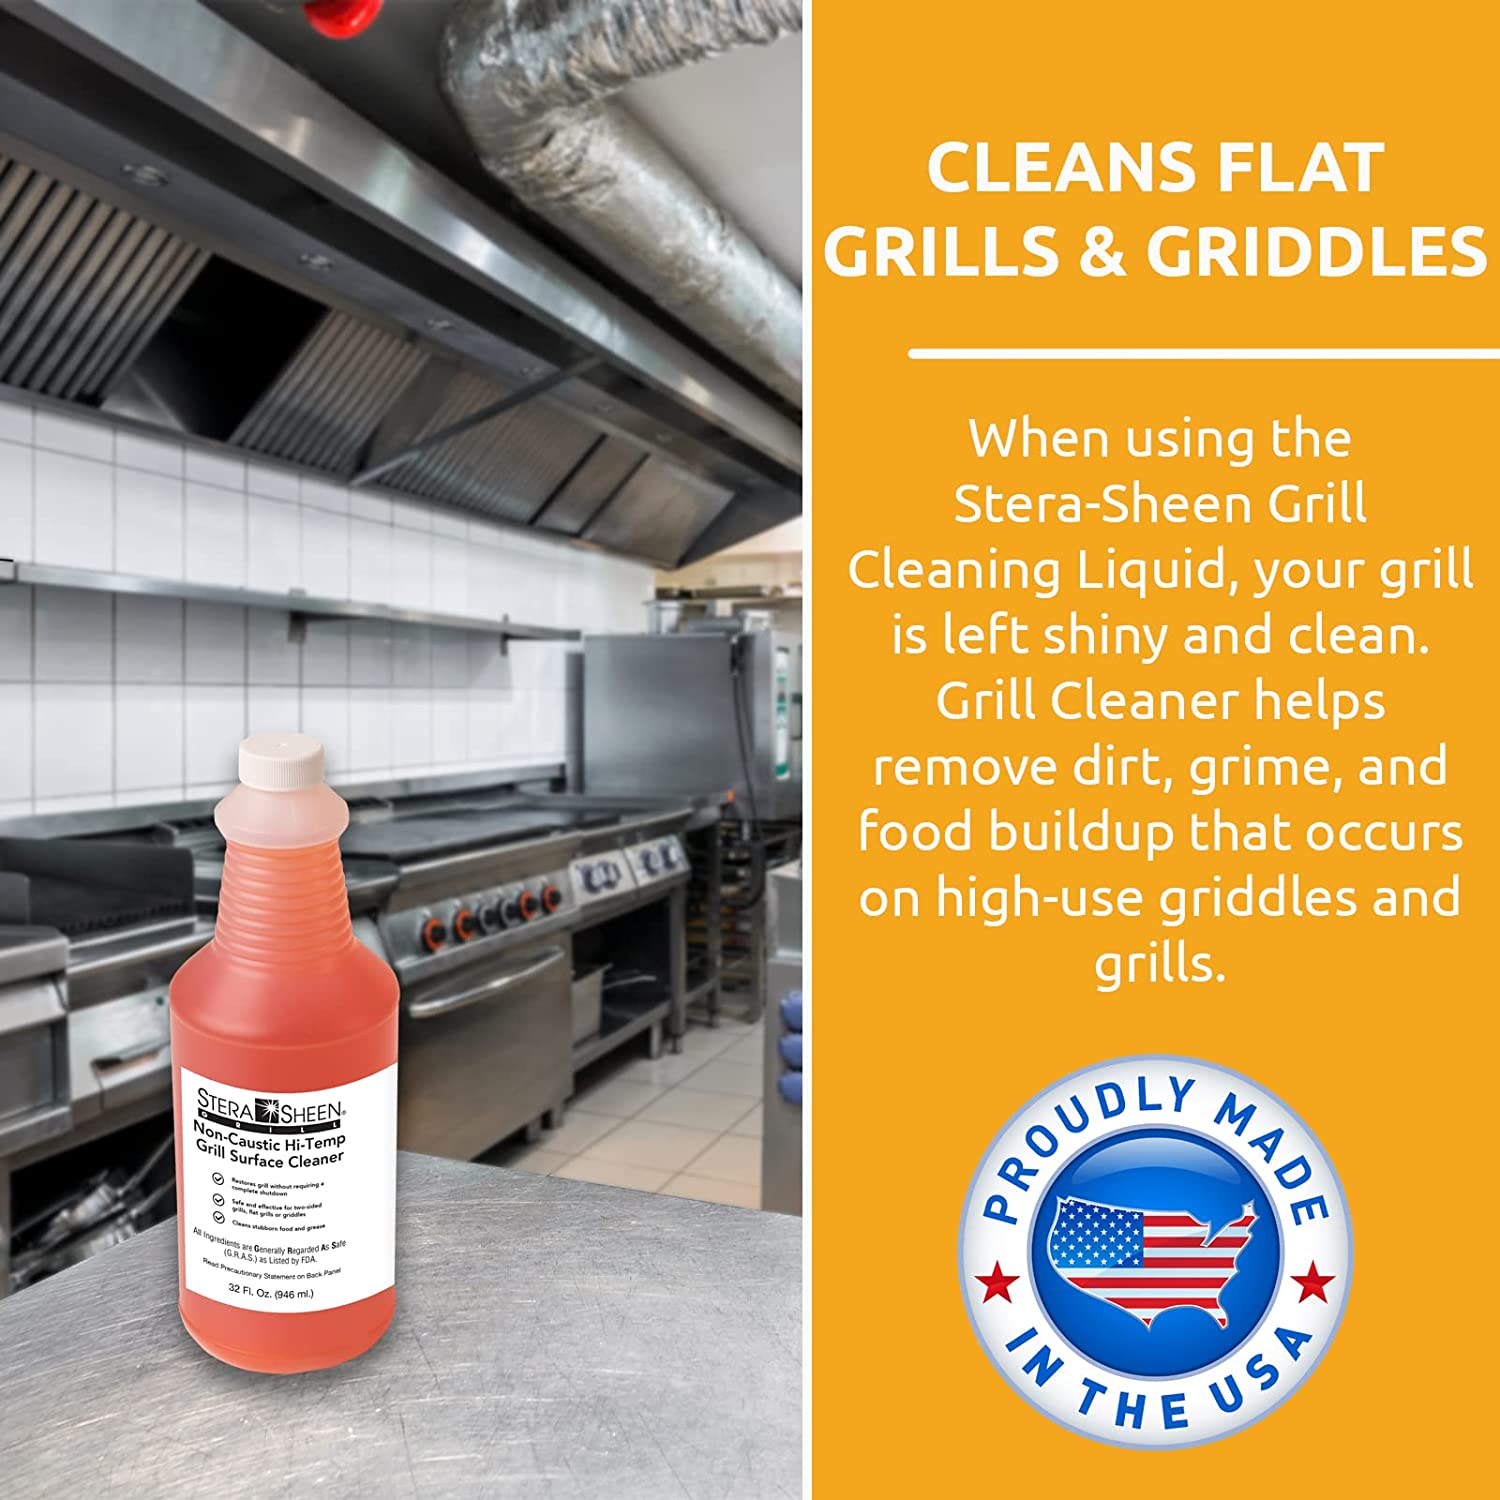 Stera-Sheen Griddle & Flat Grill Surface Cleaner, 1 x 32 fl oz Bottle, Food-Safe, Non-Caustic, Powerful Griddle Surface Cleaner, Clean Hot Surfaces, Eliminate Tough Encrusted Grease, (1 x 946ml)